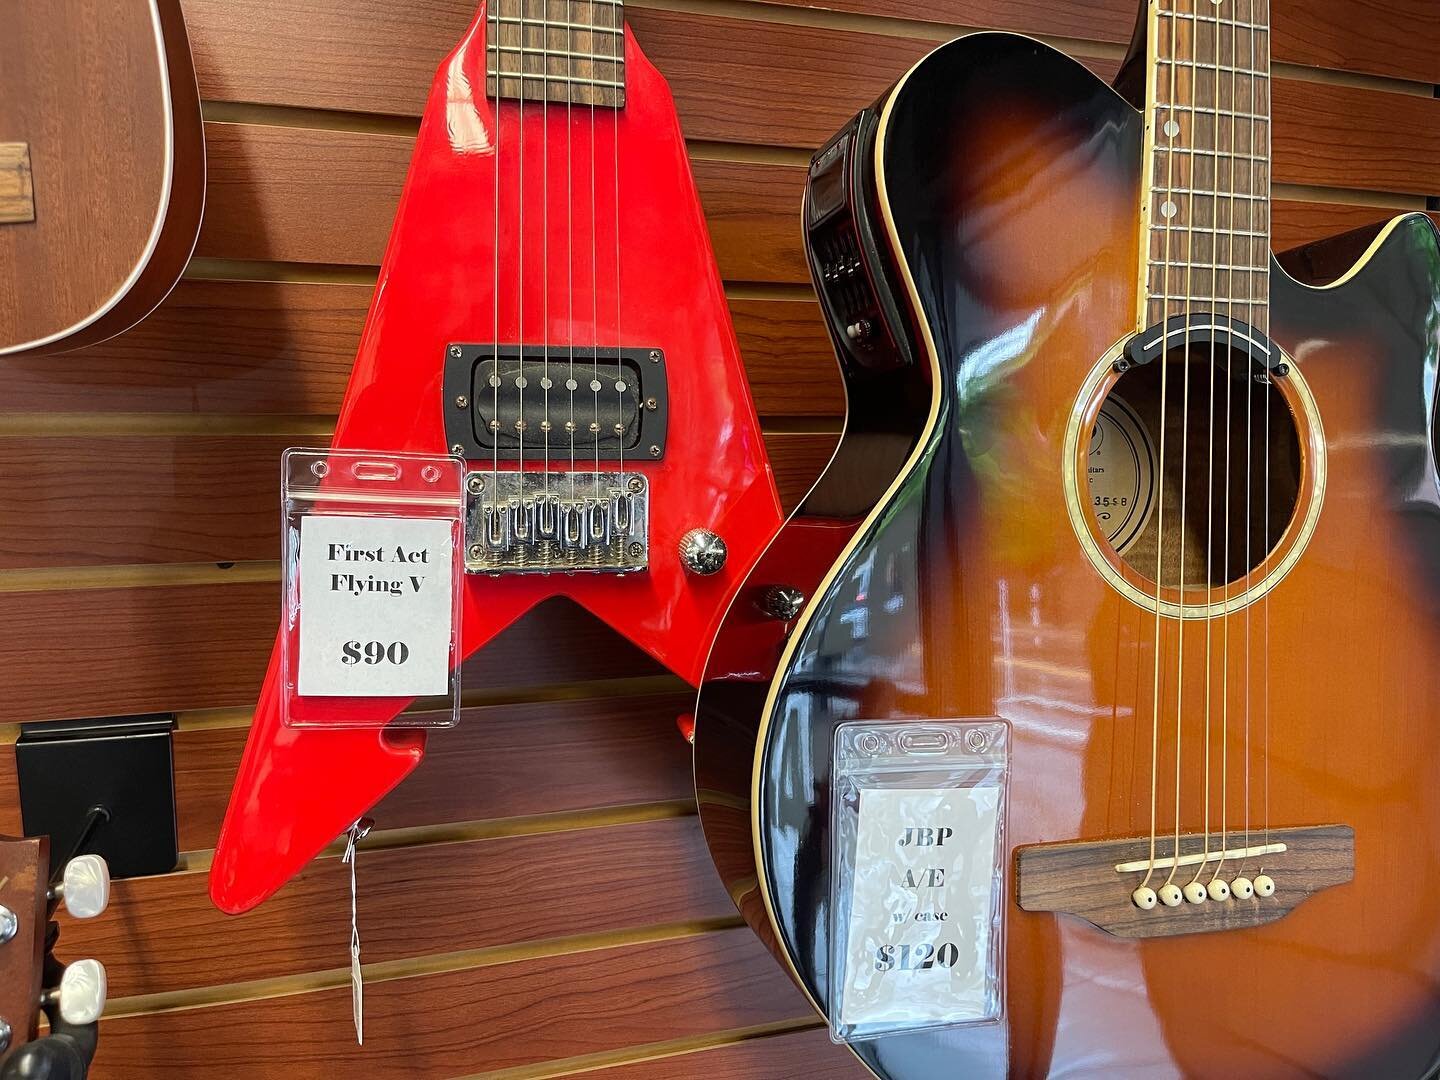 HUGE assortment of electric, acoustic, and bass guitars, amps, drums - we have it all!

Visit us today and speak with one our associates about our ongoing guitar sale.